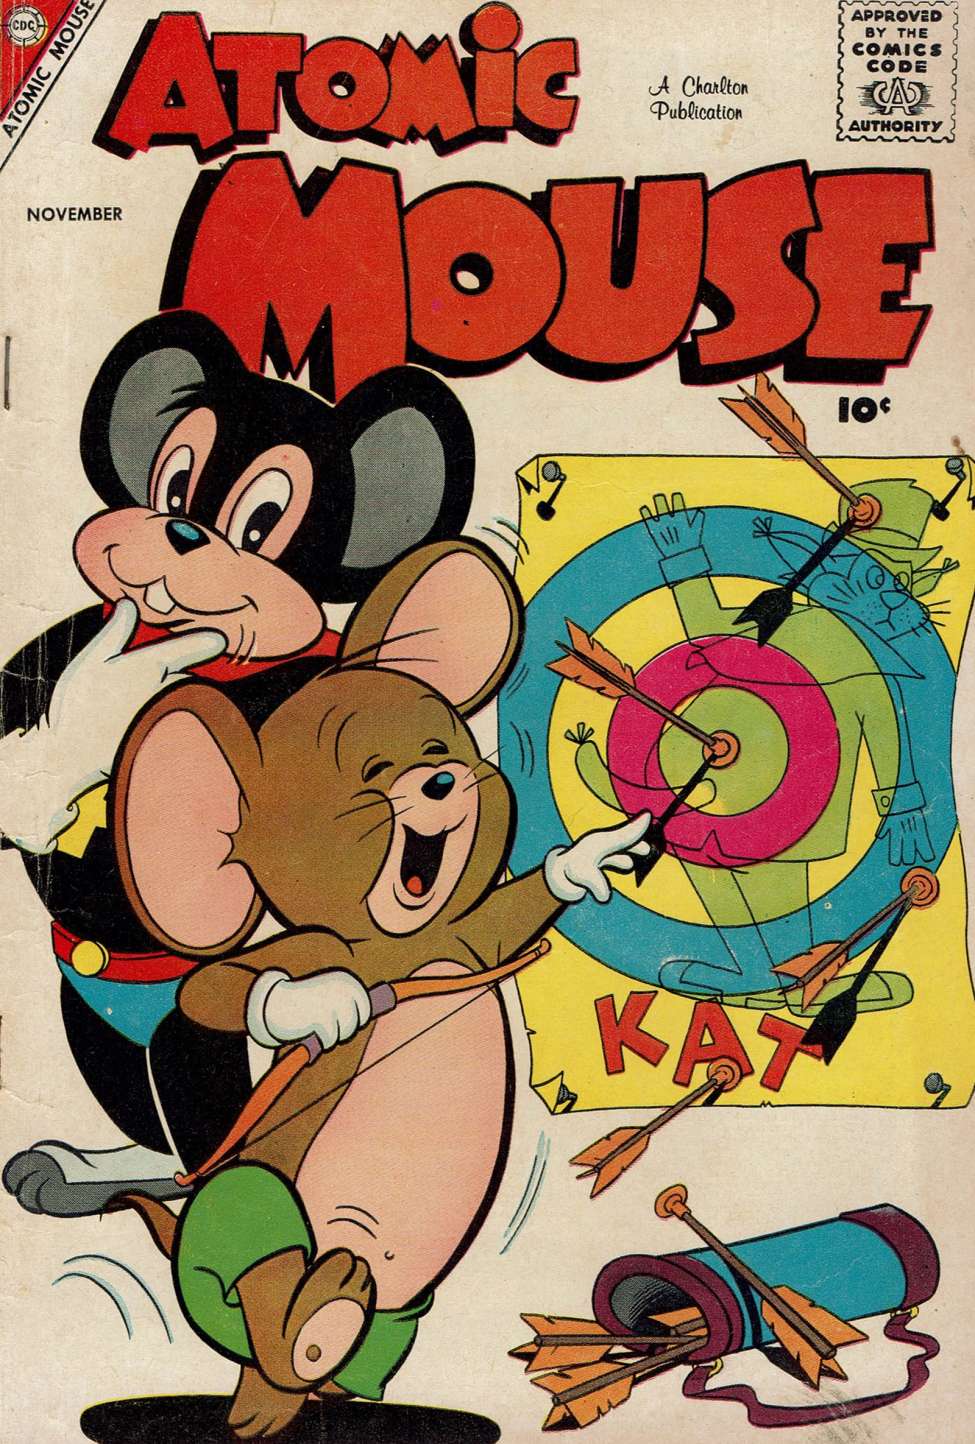 Book Cover For Atomic Mouse 28 - Version 2